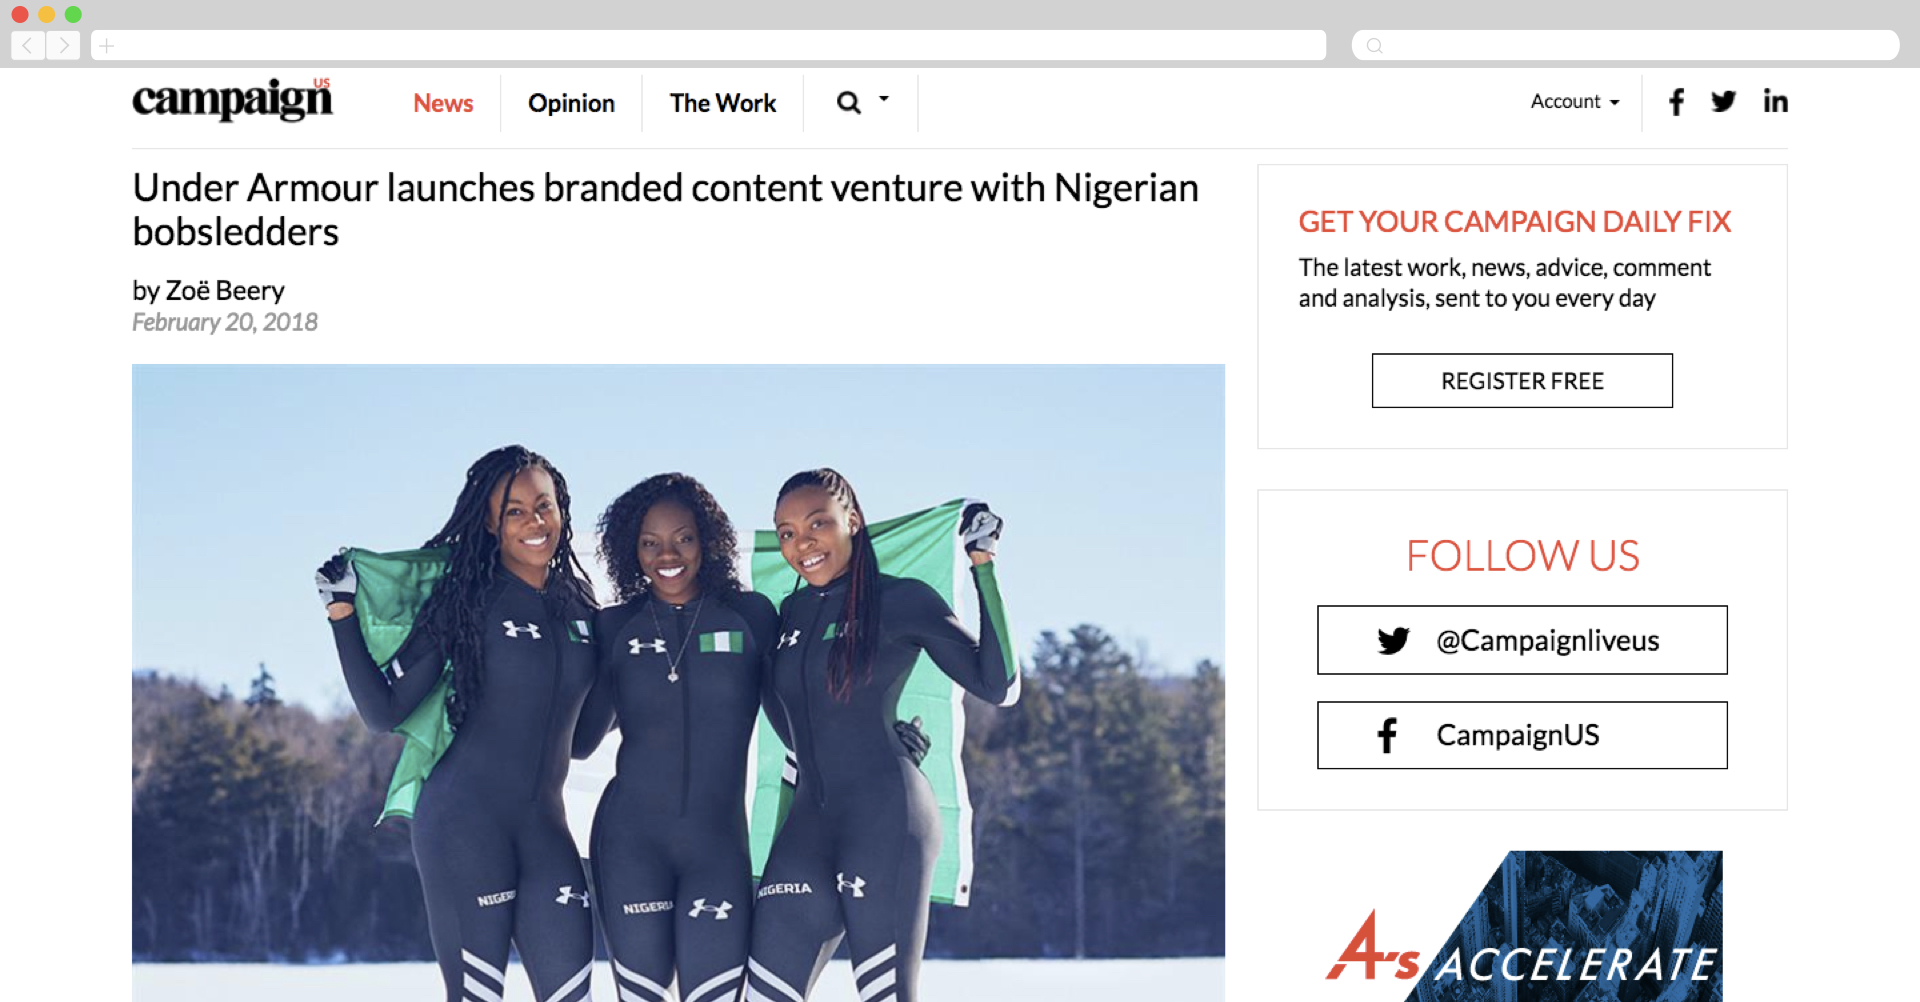 Under Armour Launches Branded Content Venture with Nigerian Bobsledders